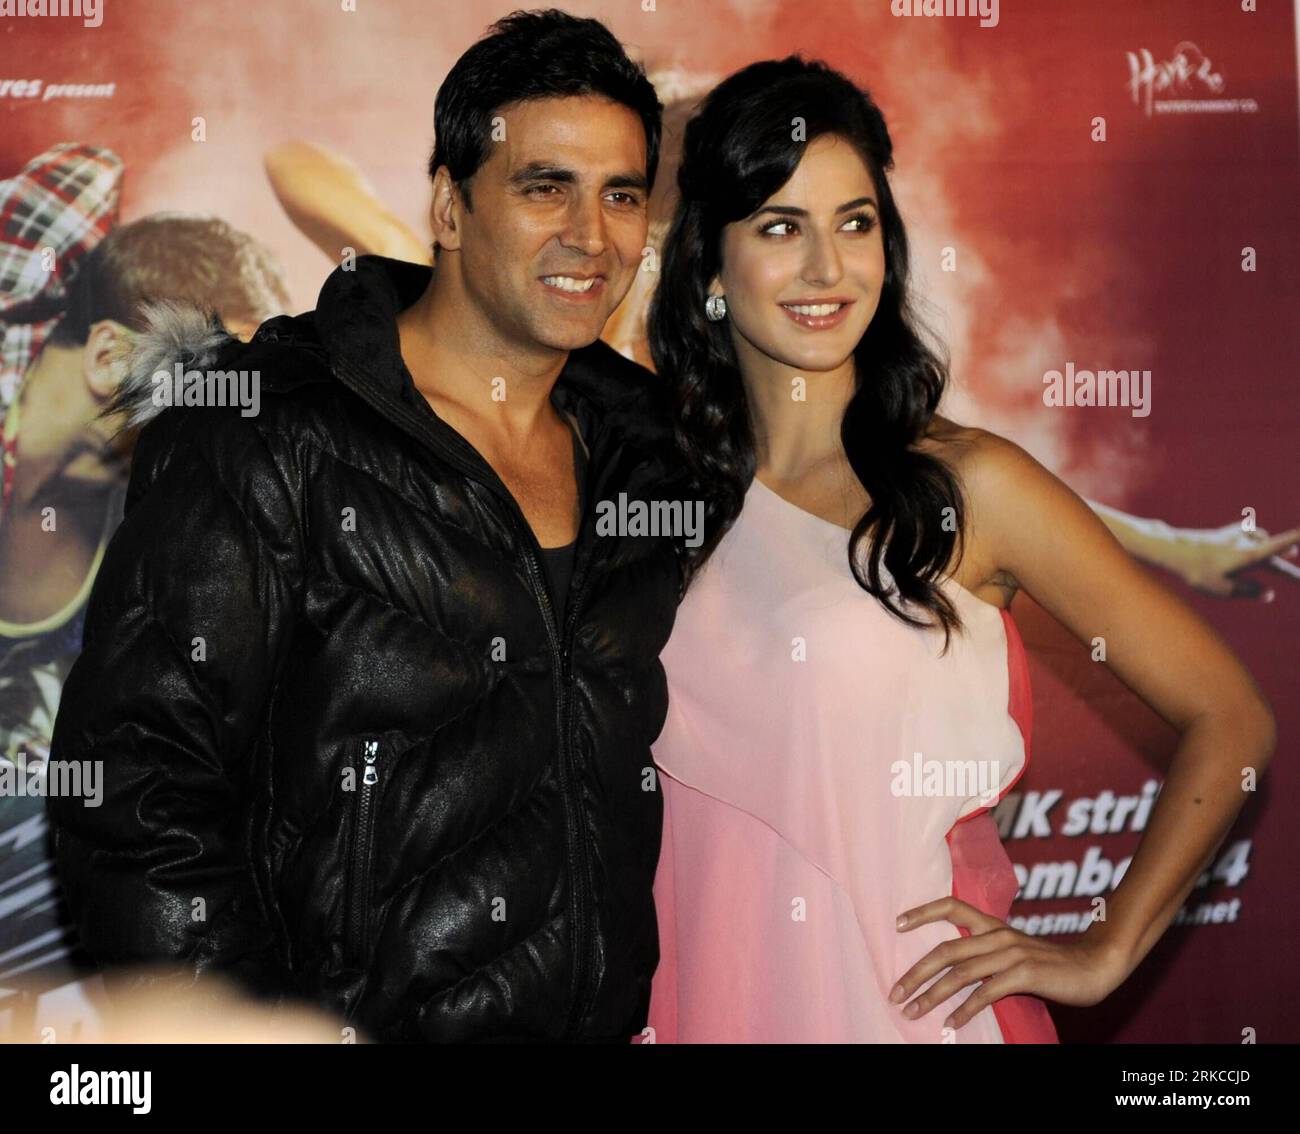 bildnummer 54740649 datum 11122010 copyright imagoxinhua 101211 calcutta dec 11 2010 xinhua indian bollywood actress katrina kaif r and actor akshay kumar pose for a photocall during a press conference as promoting their upcoming film tees maar khan in calcutta capital of eastern indian state west bengal on dec 11 2010 xinhuatumpa mondal wh india entertainment movie publicationxnotxinxchn entertainment people film kbdig xsp 2010 quadrat bildnummer 54740649 date 11 12 2010 copyright imago xinhua calcutta dec 11 2010 xinhua indian bollywood actress katrina 2RKCCJD